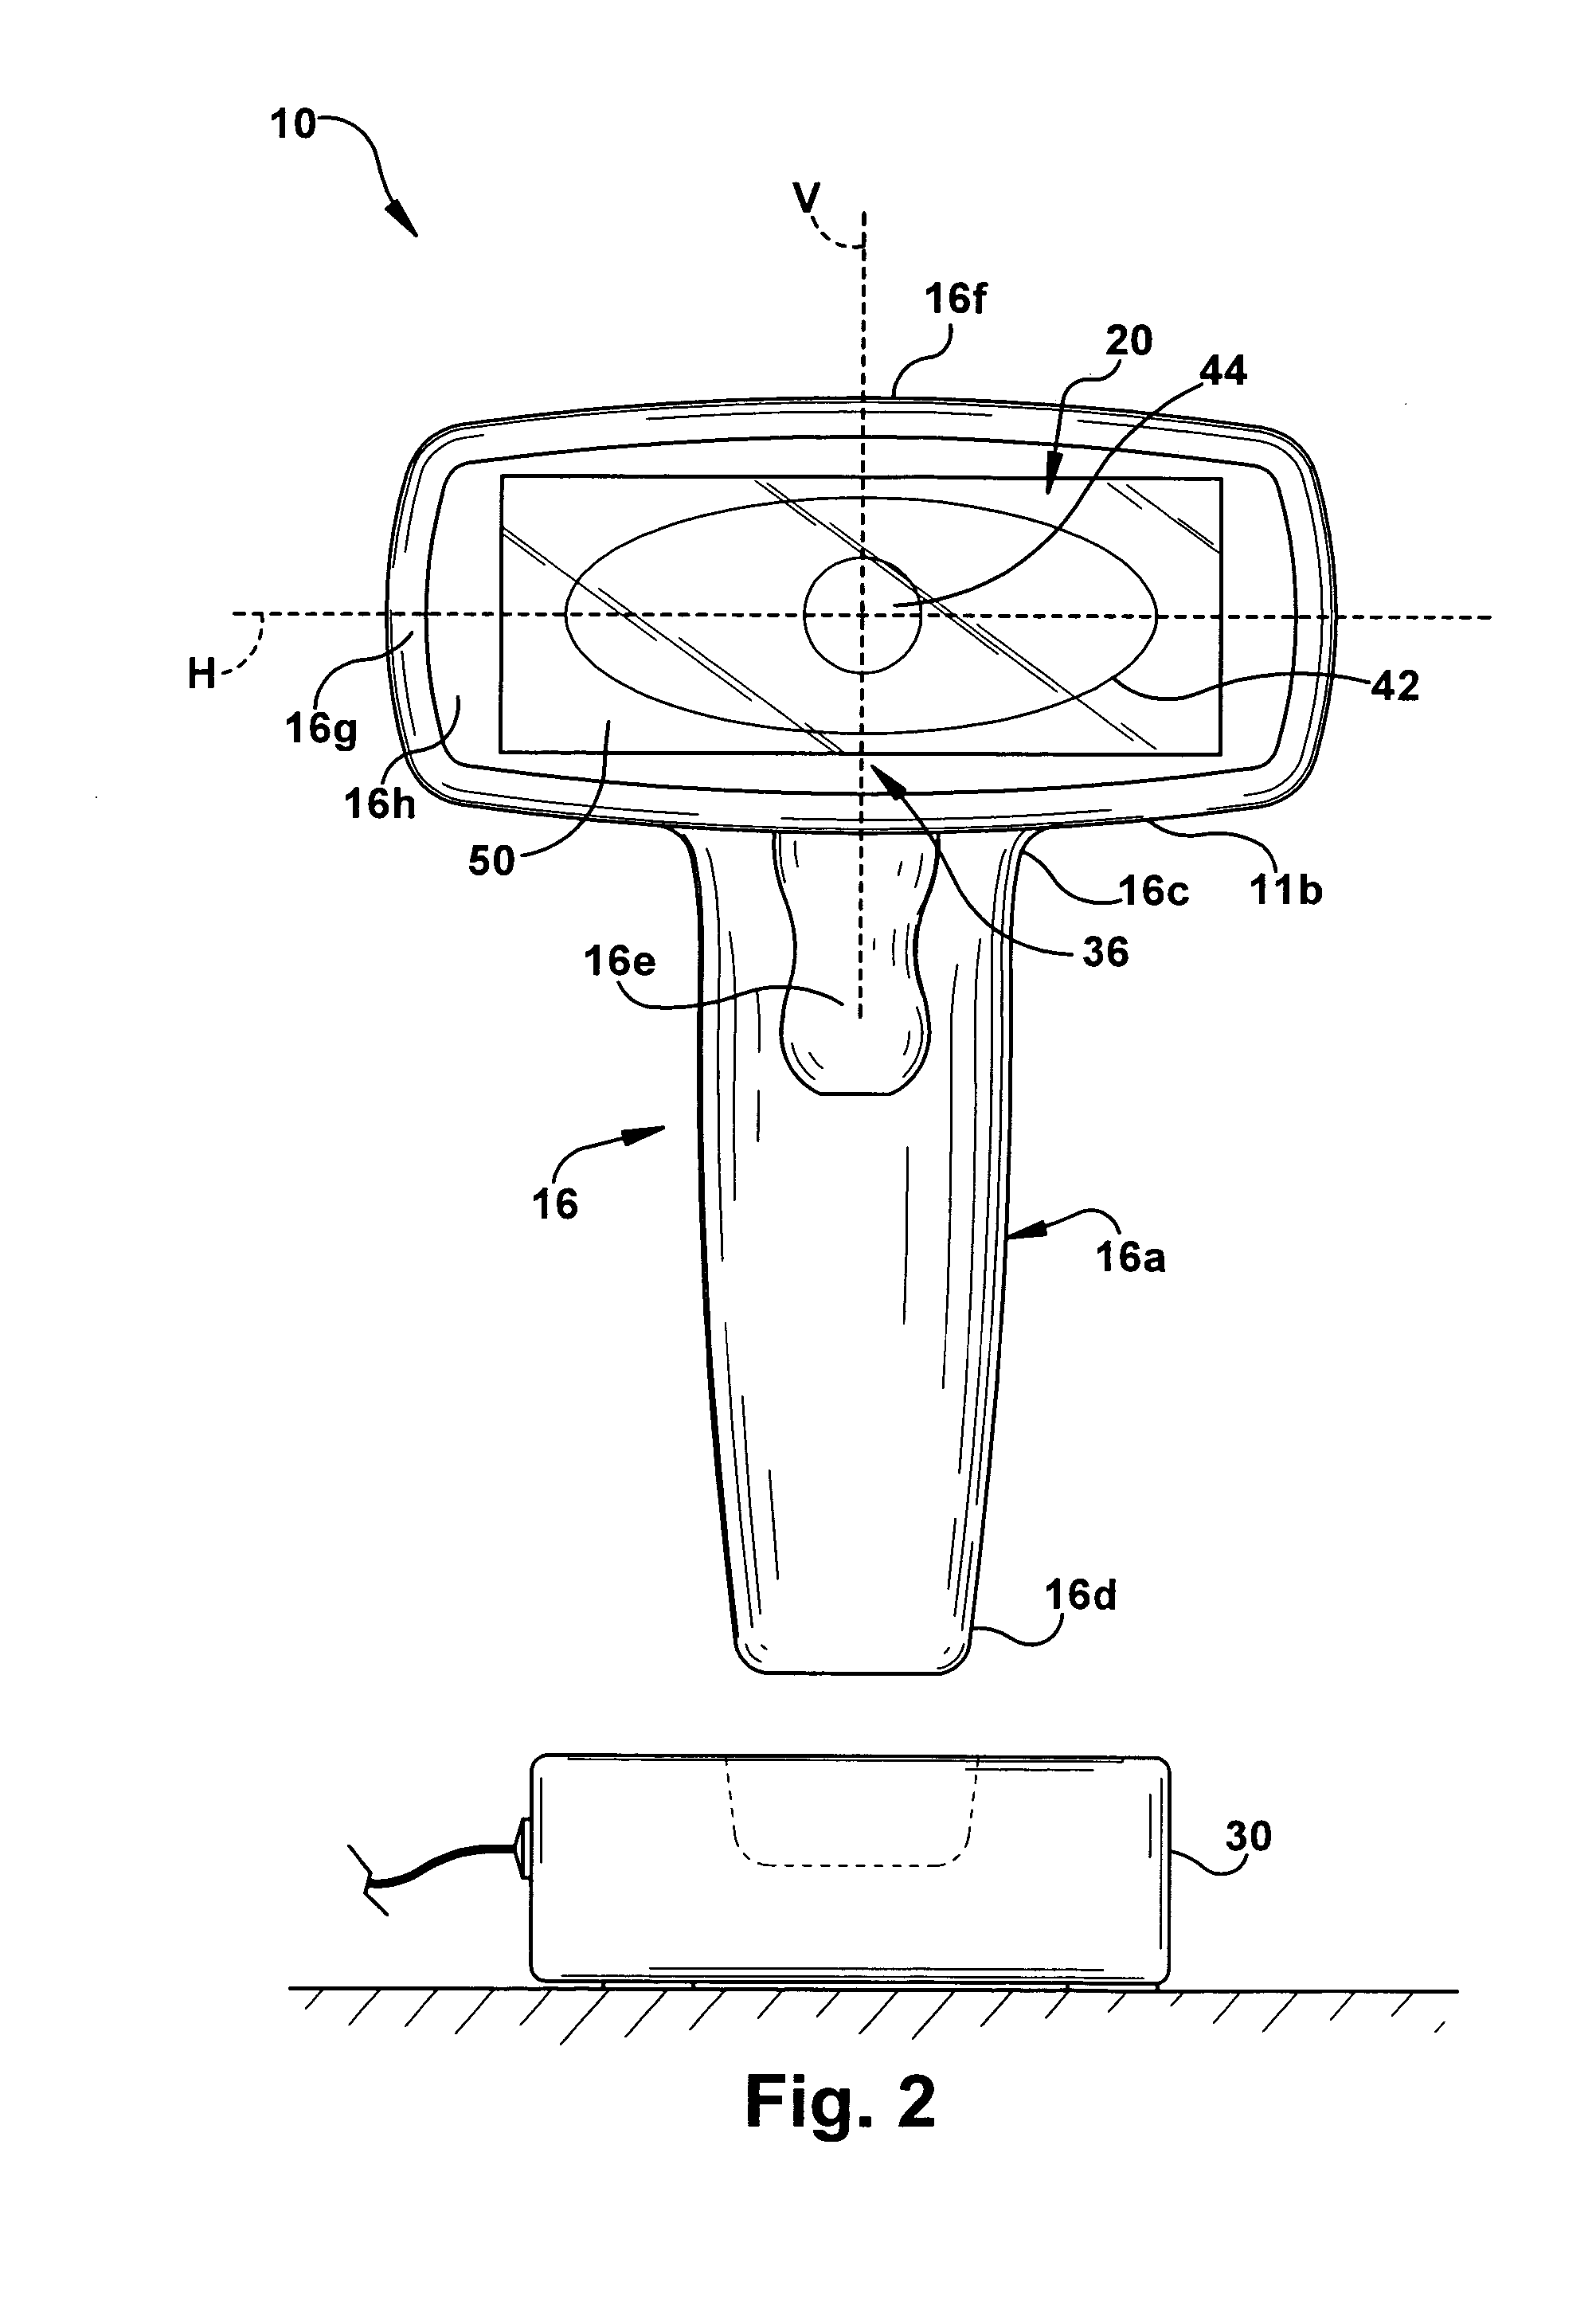 Illumination system including a curved mirror for an imaging-based bar code reader